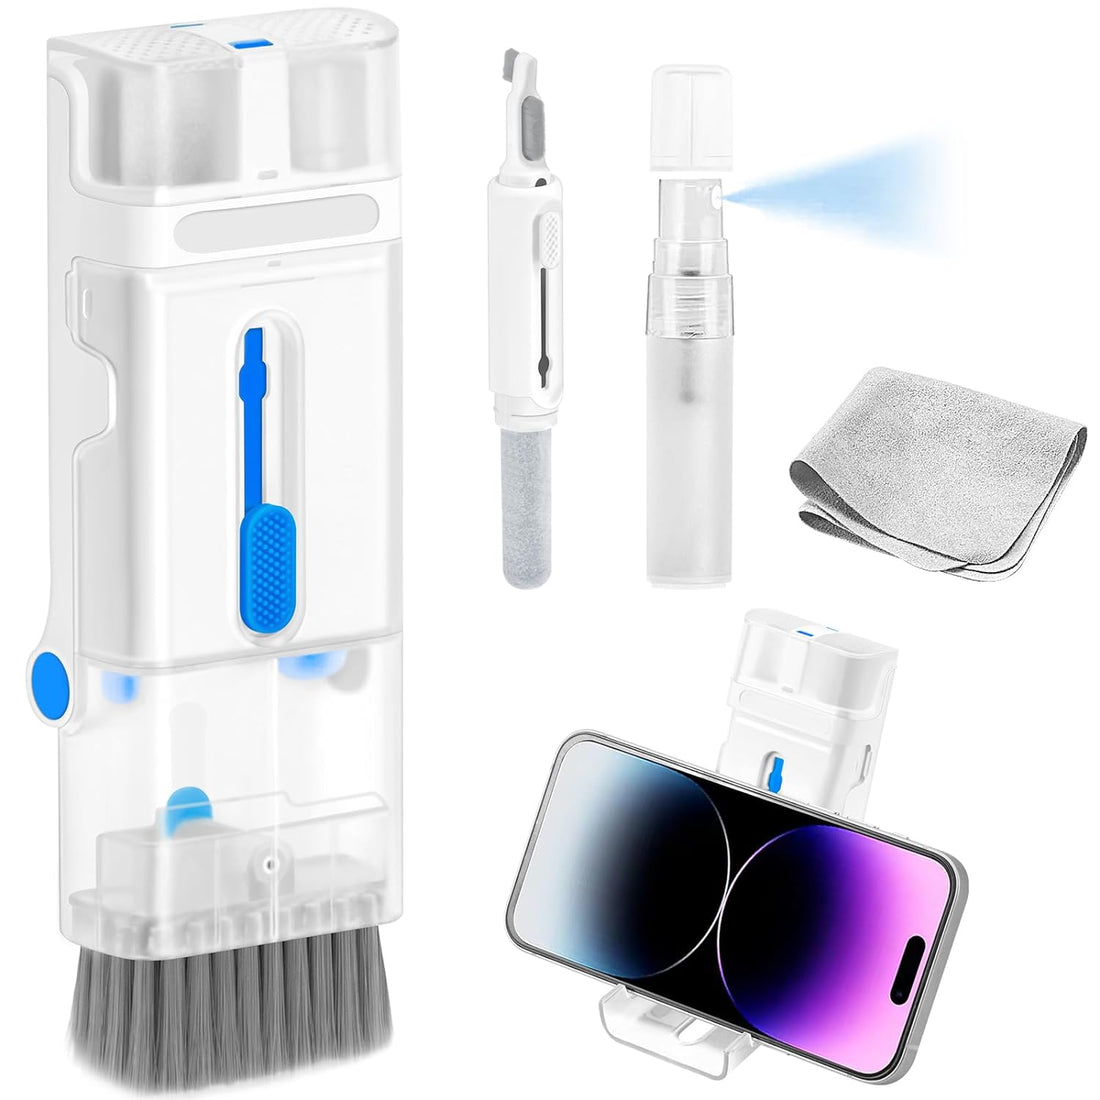 Laptop Keyboard Screen Cleaner Kit for Airpod Phone Computer Camera Lens Eyeglass, Electronic Airpods Cleaning Pen Brush Touchscreen Mist Spray for MacBook iPhone iPad iPod, with Phone Holder - Blue